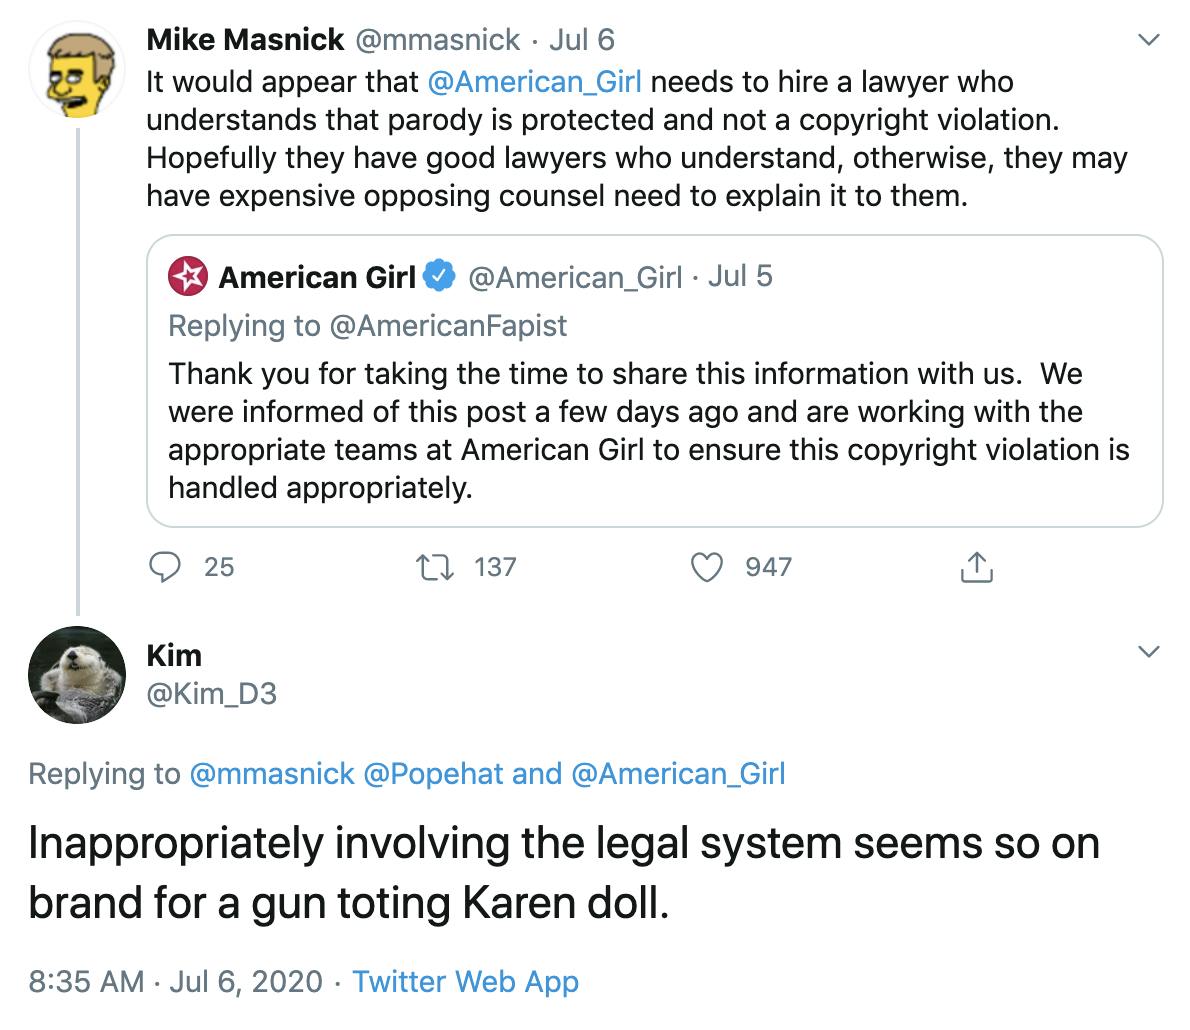 @mmasnick "It would appear that  @American_Girl  needs to hire a lawyer who understands that parody is protected and not a copyright violation. Hopefully they have good lawyers who understand, otherwise, they may have expensive opposing counsel need to explain it to them." @Kim_D3 "Inappropriately involving the legal system seems so on brand for a gun toting Karen doll."